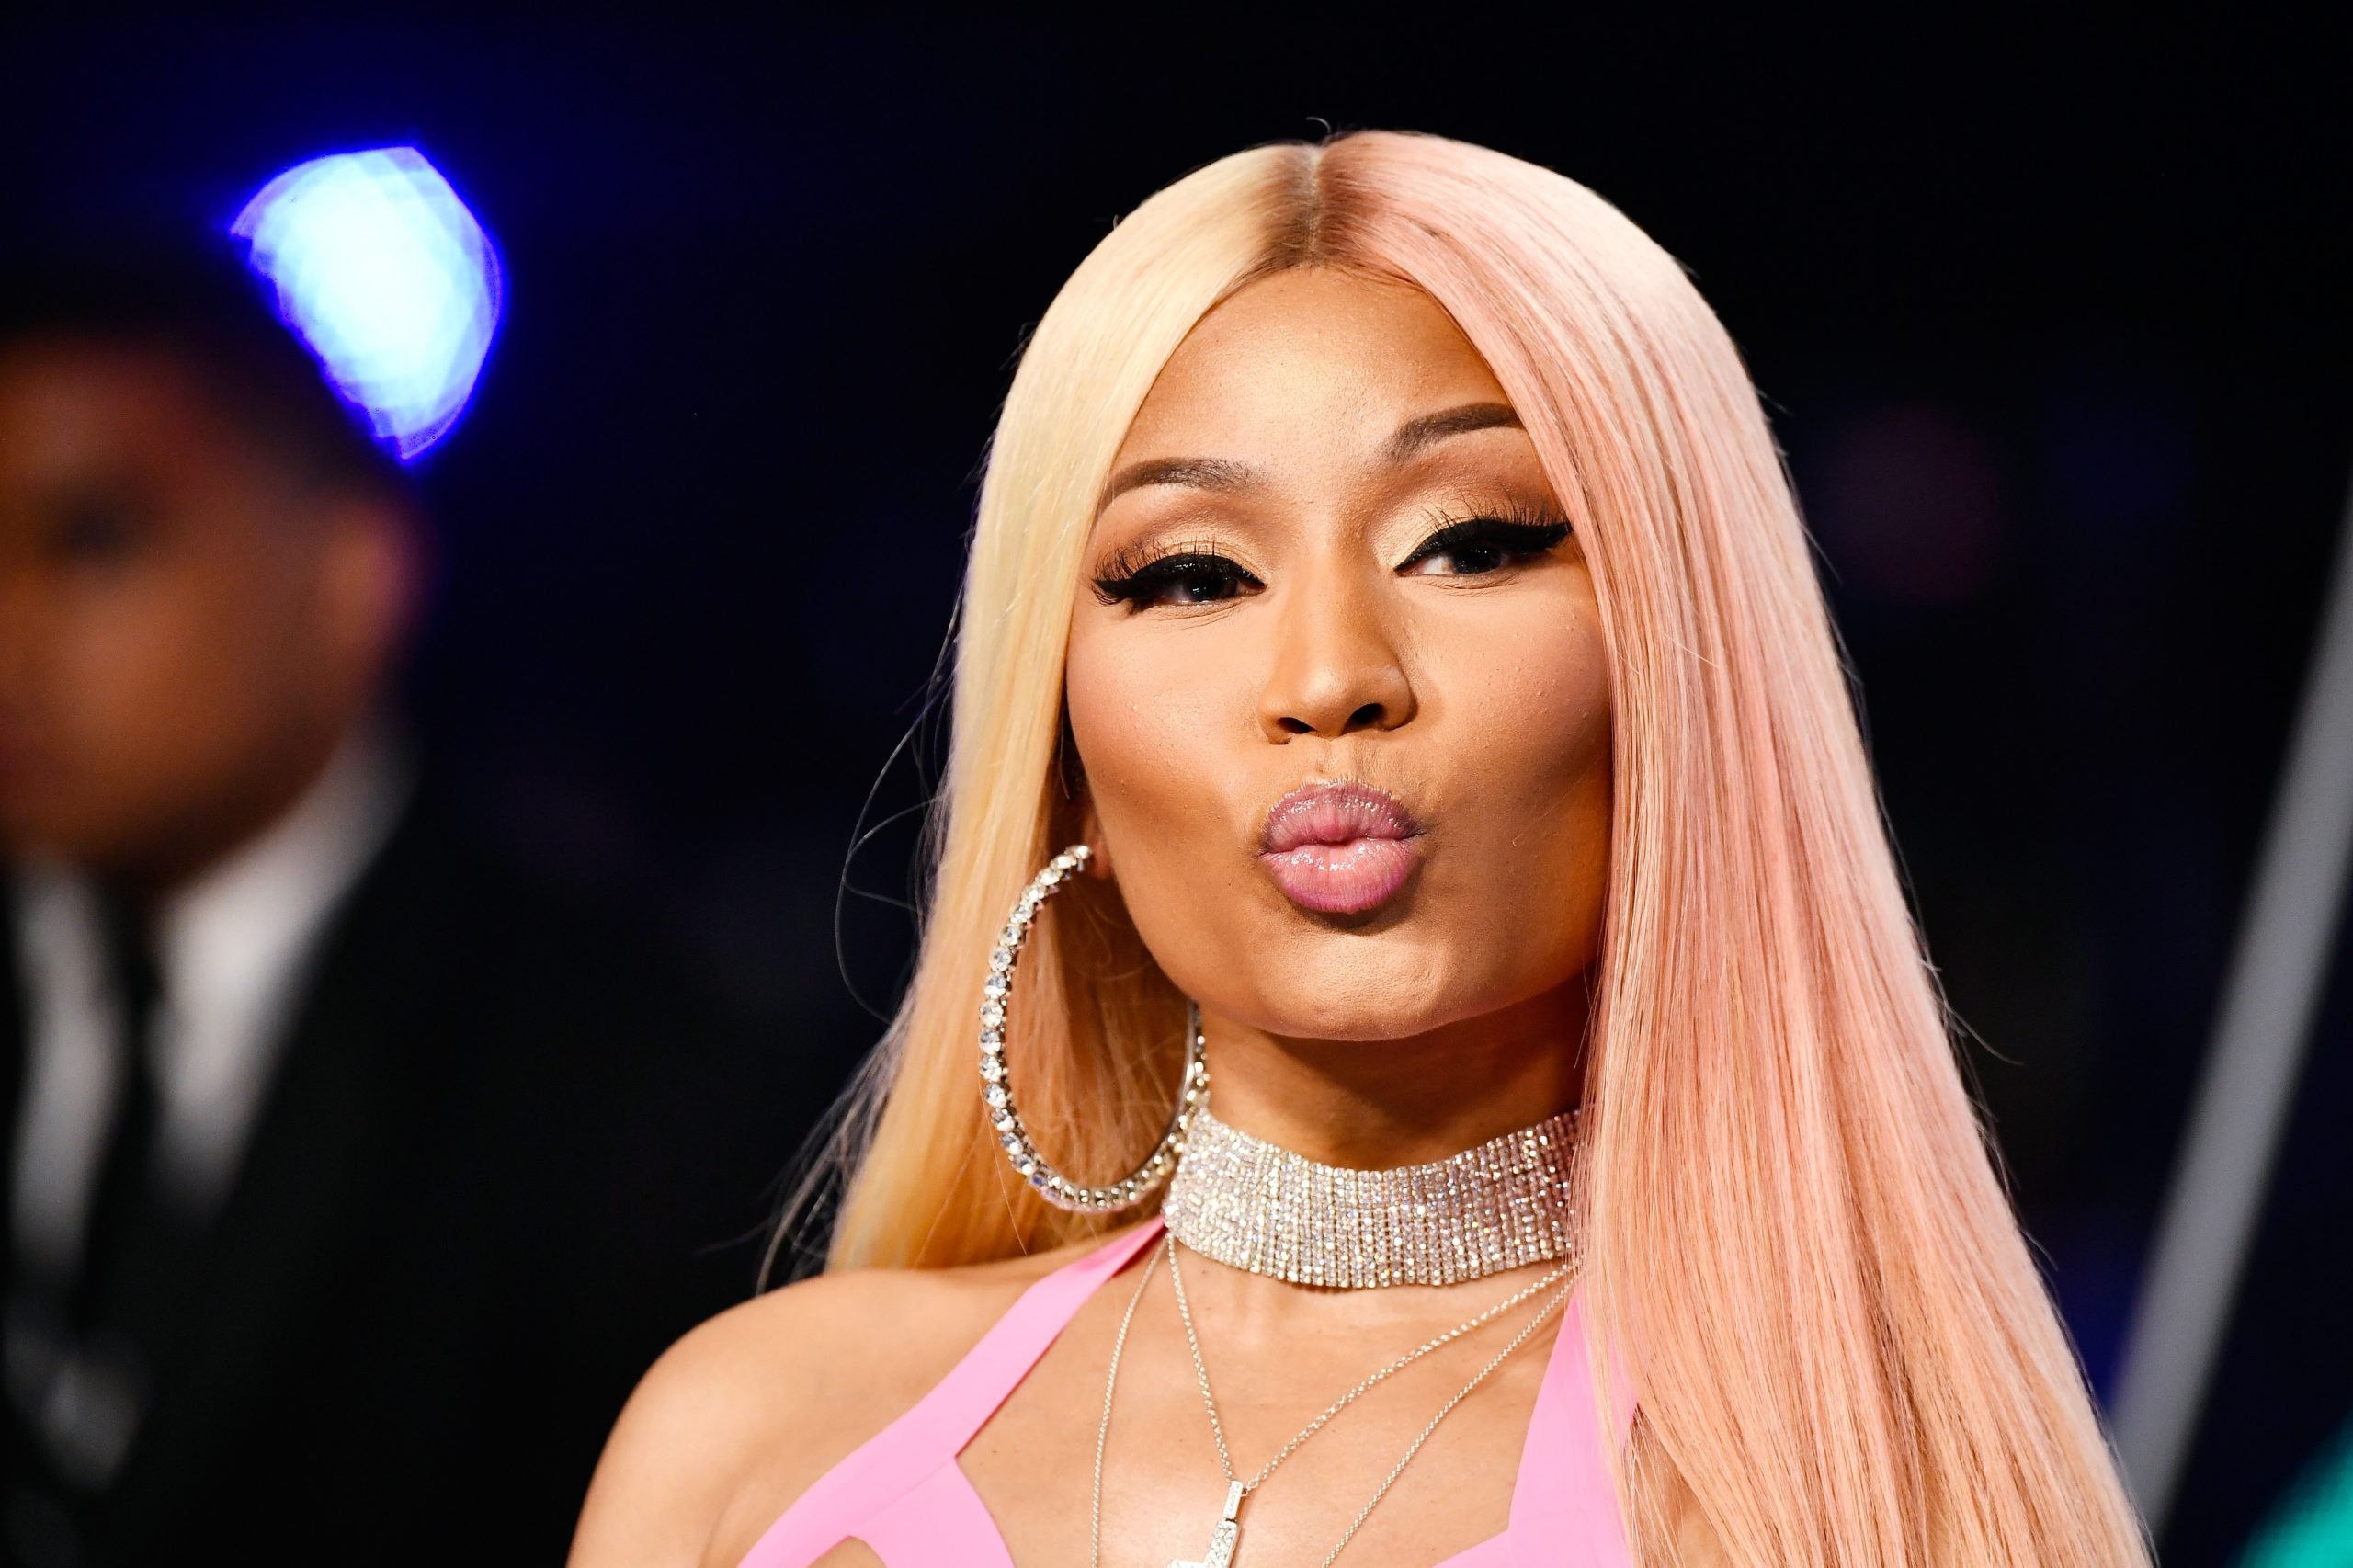 A Pregnant Nicki Minaj Rapping Her New Song Is The Best Thing We've Seen Today